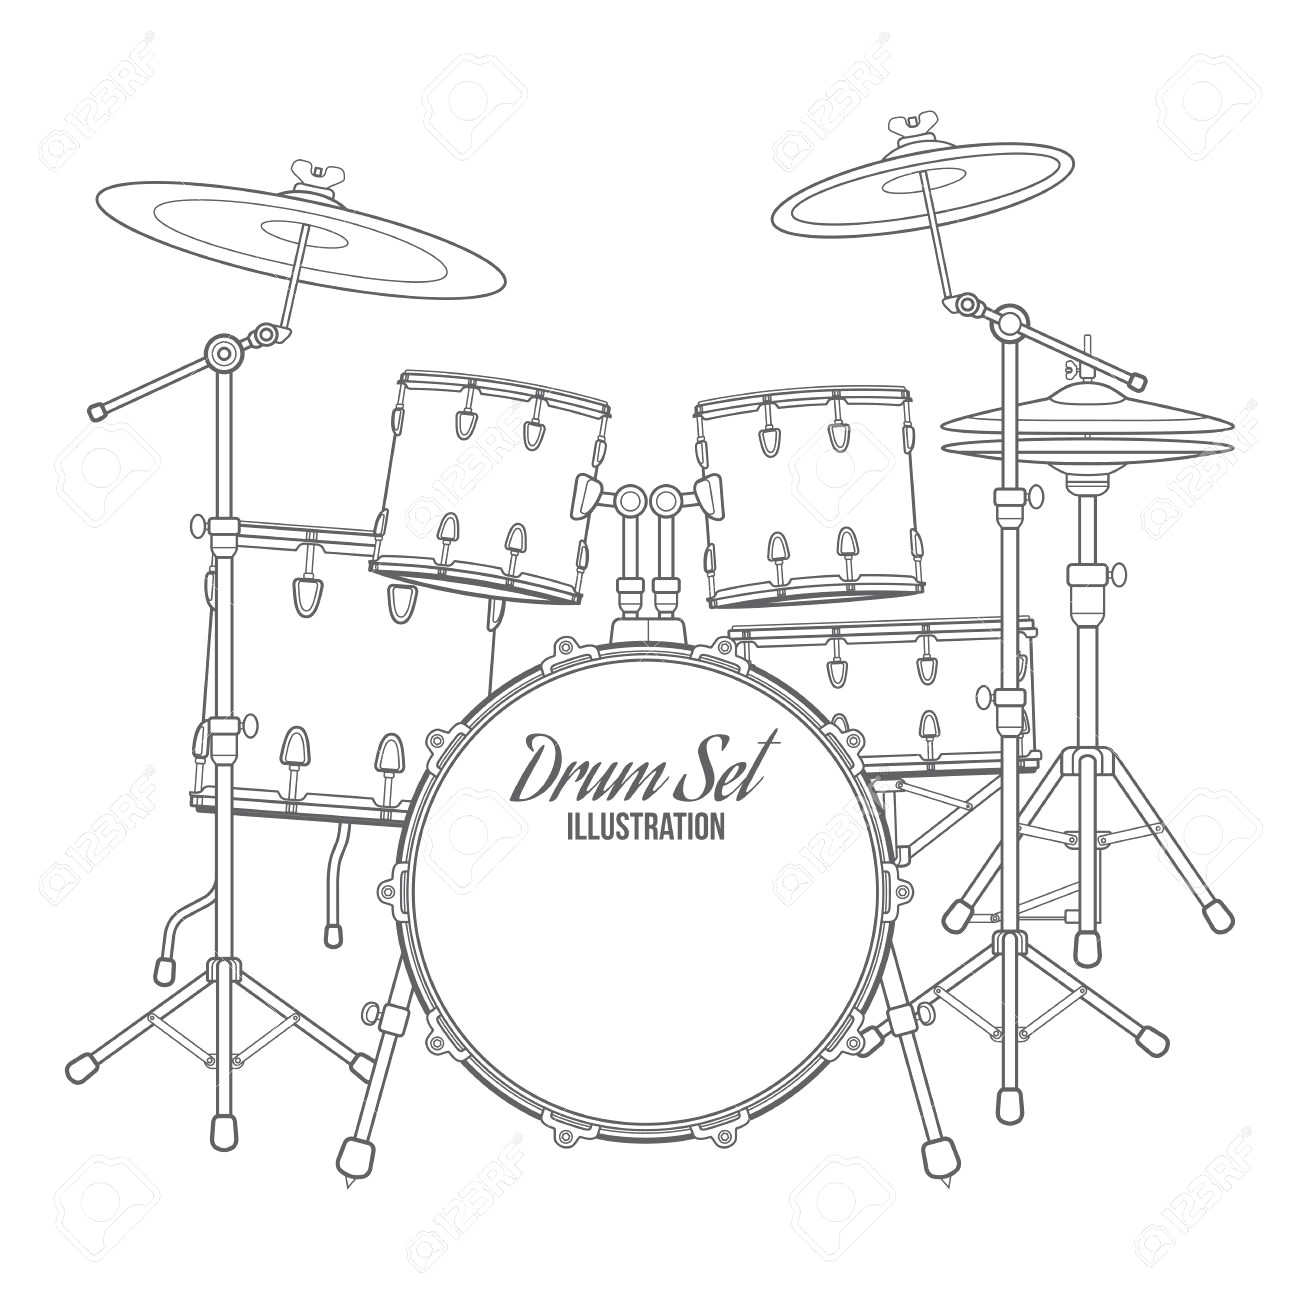 35 Trends For Sketch Drum Set Drawing Creative Things Thursday